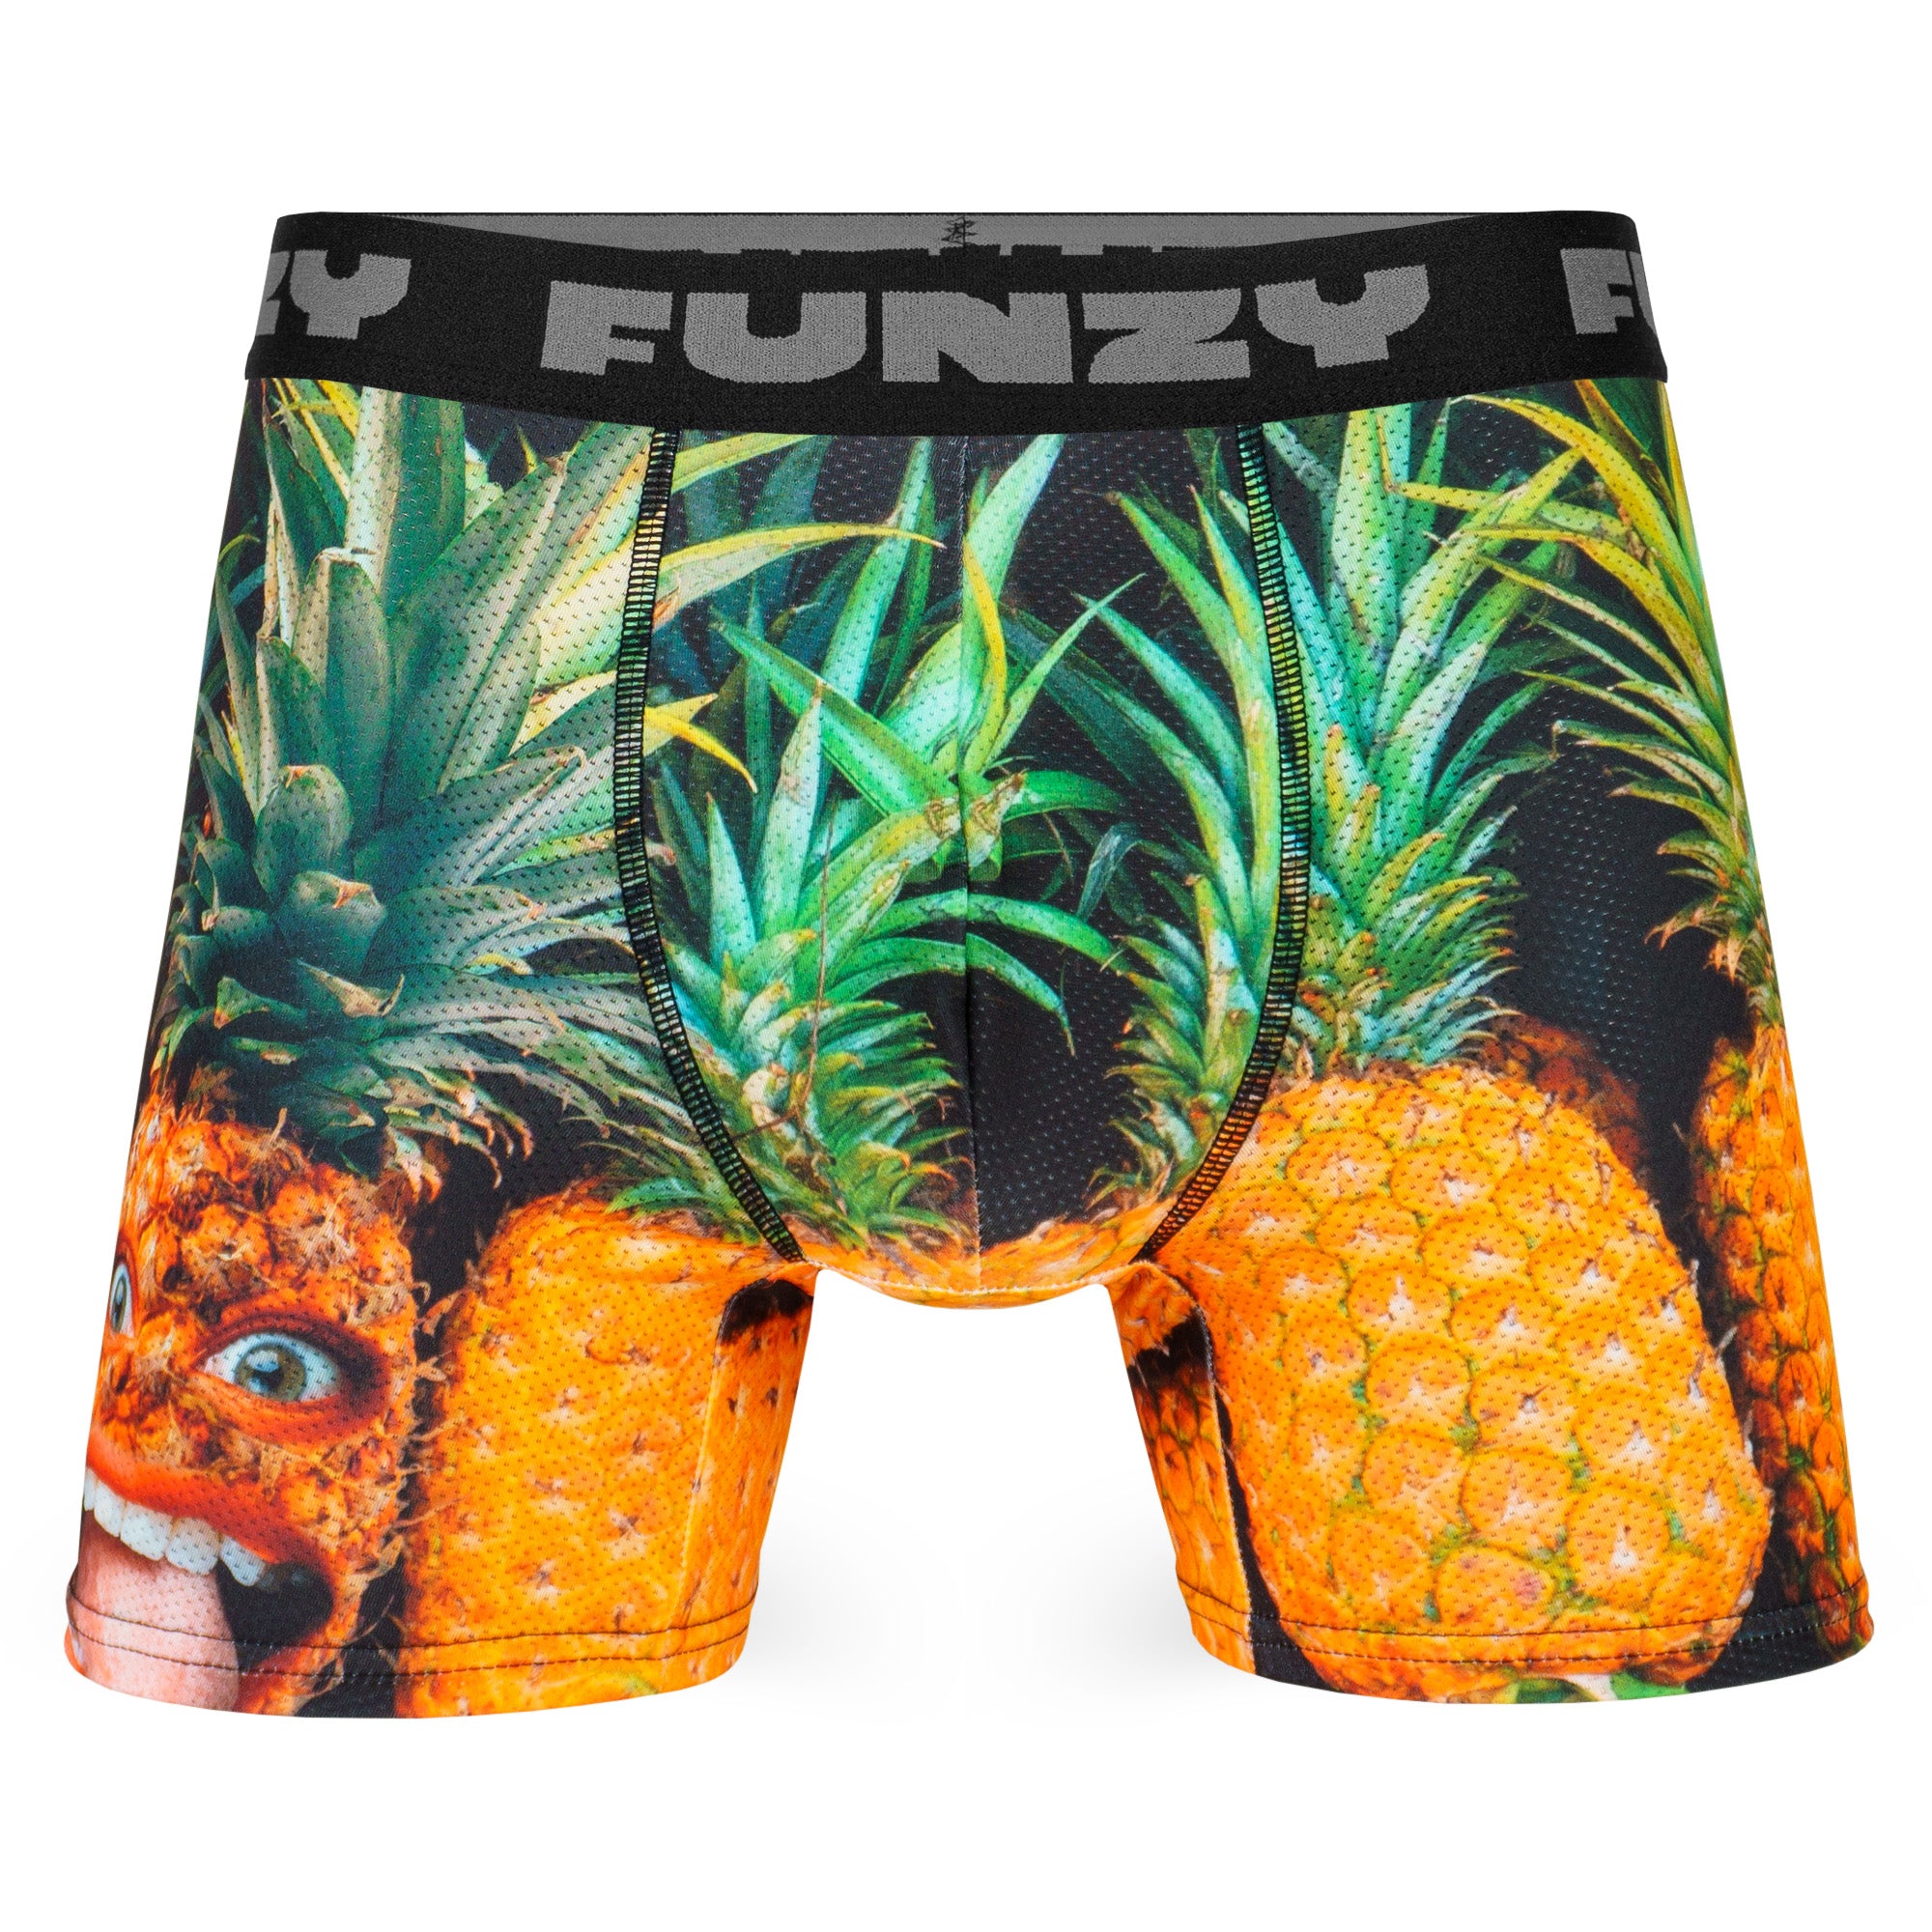 Funzy pineapple face boxers